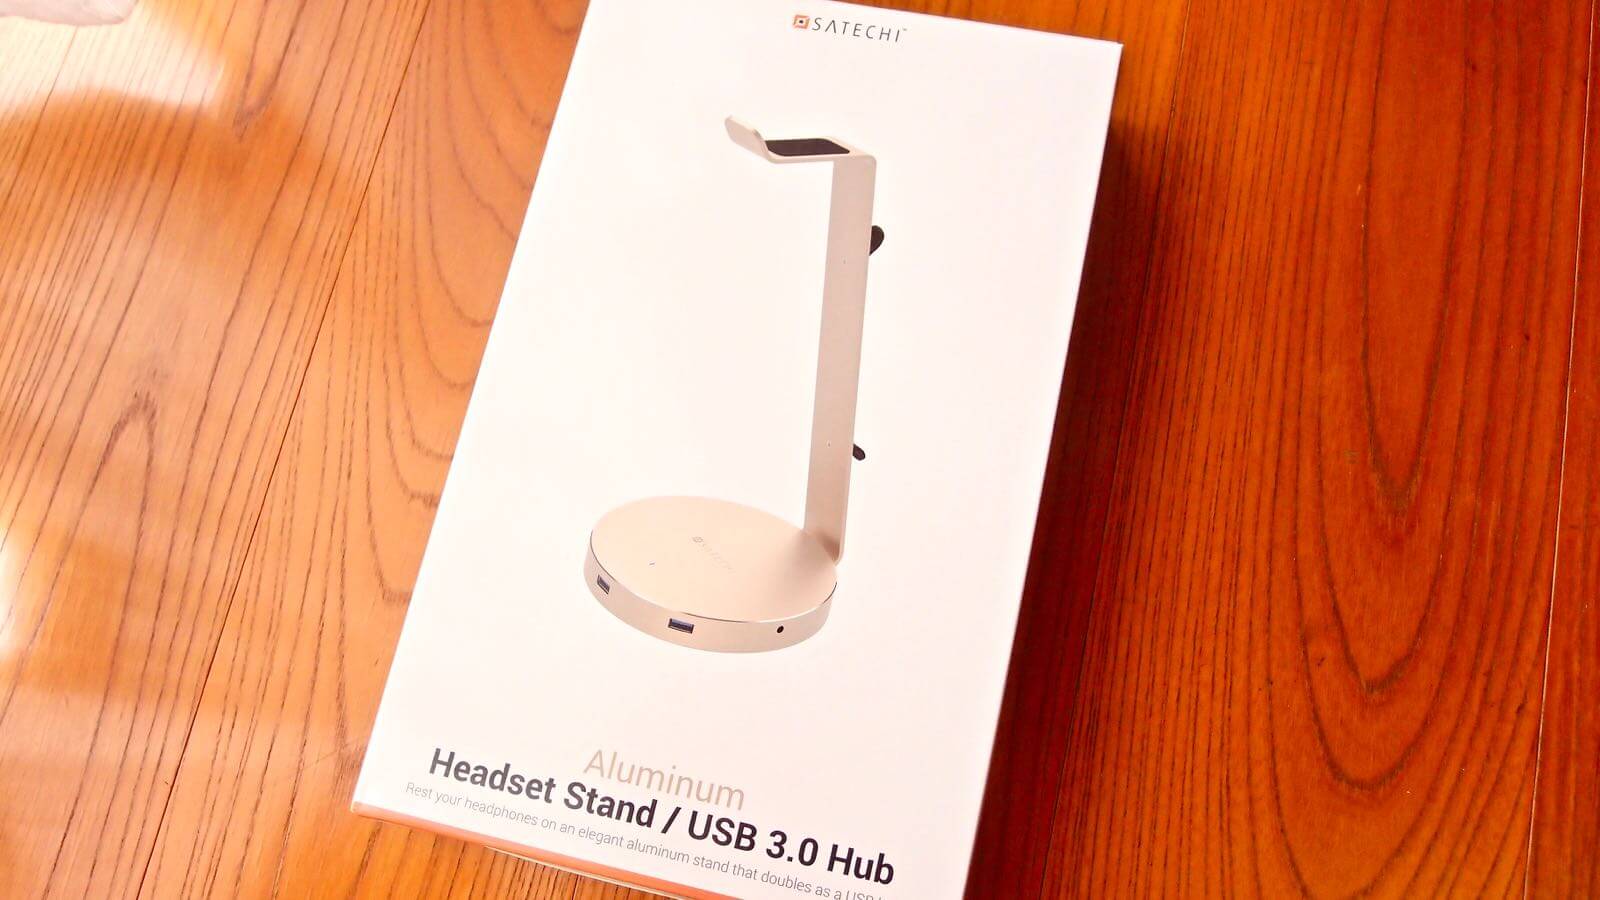 0160 Satechi s Headphone Stand Review 02